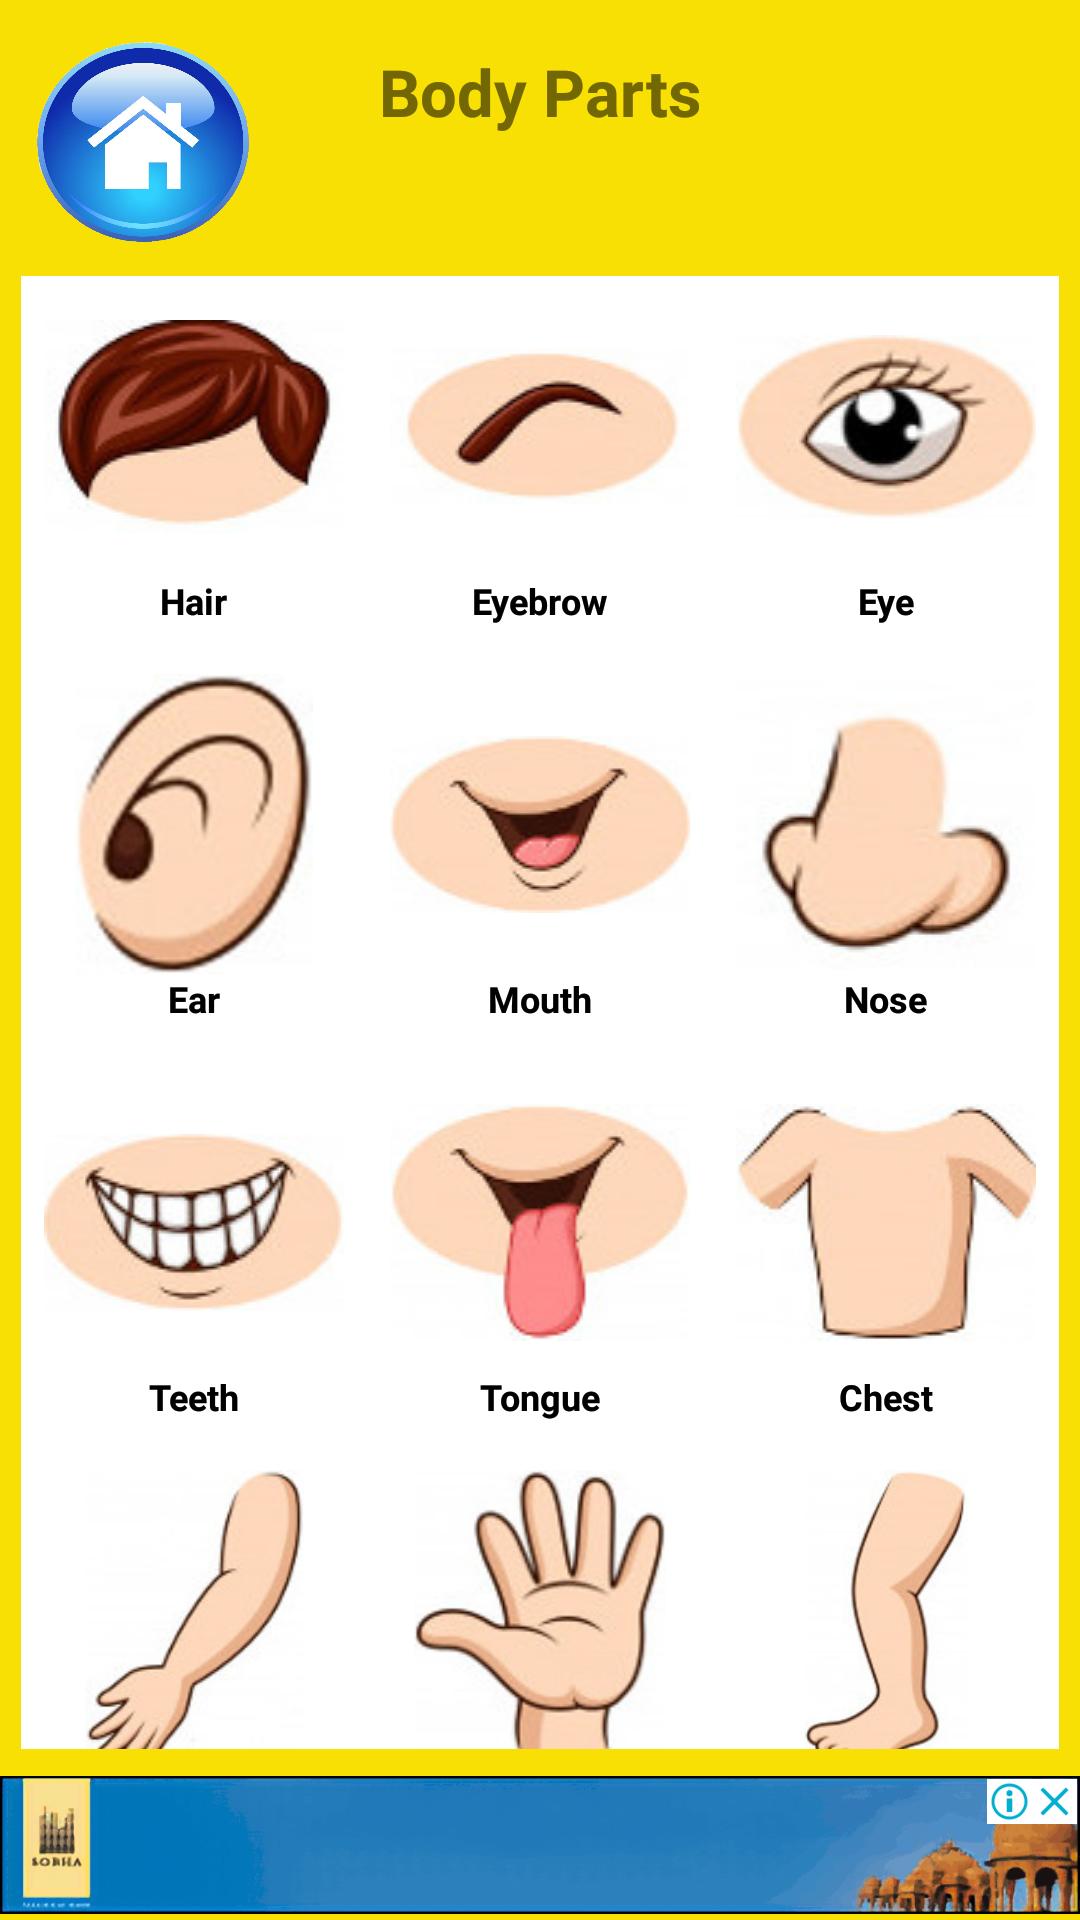 body-parts-with-pictures-parts-of-the-body-clipart-20-free-cliparts-download-internal